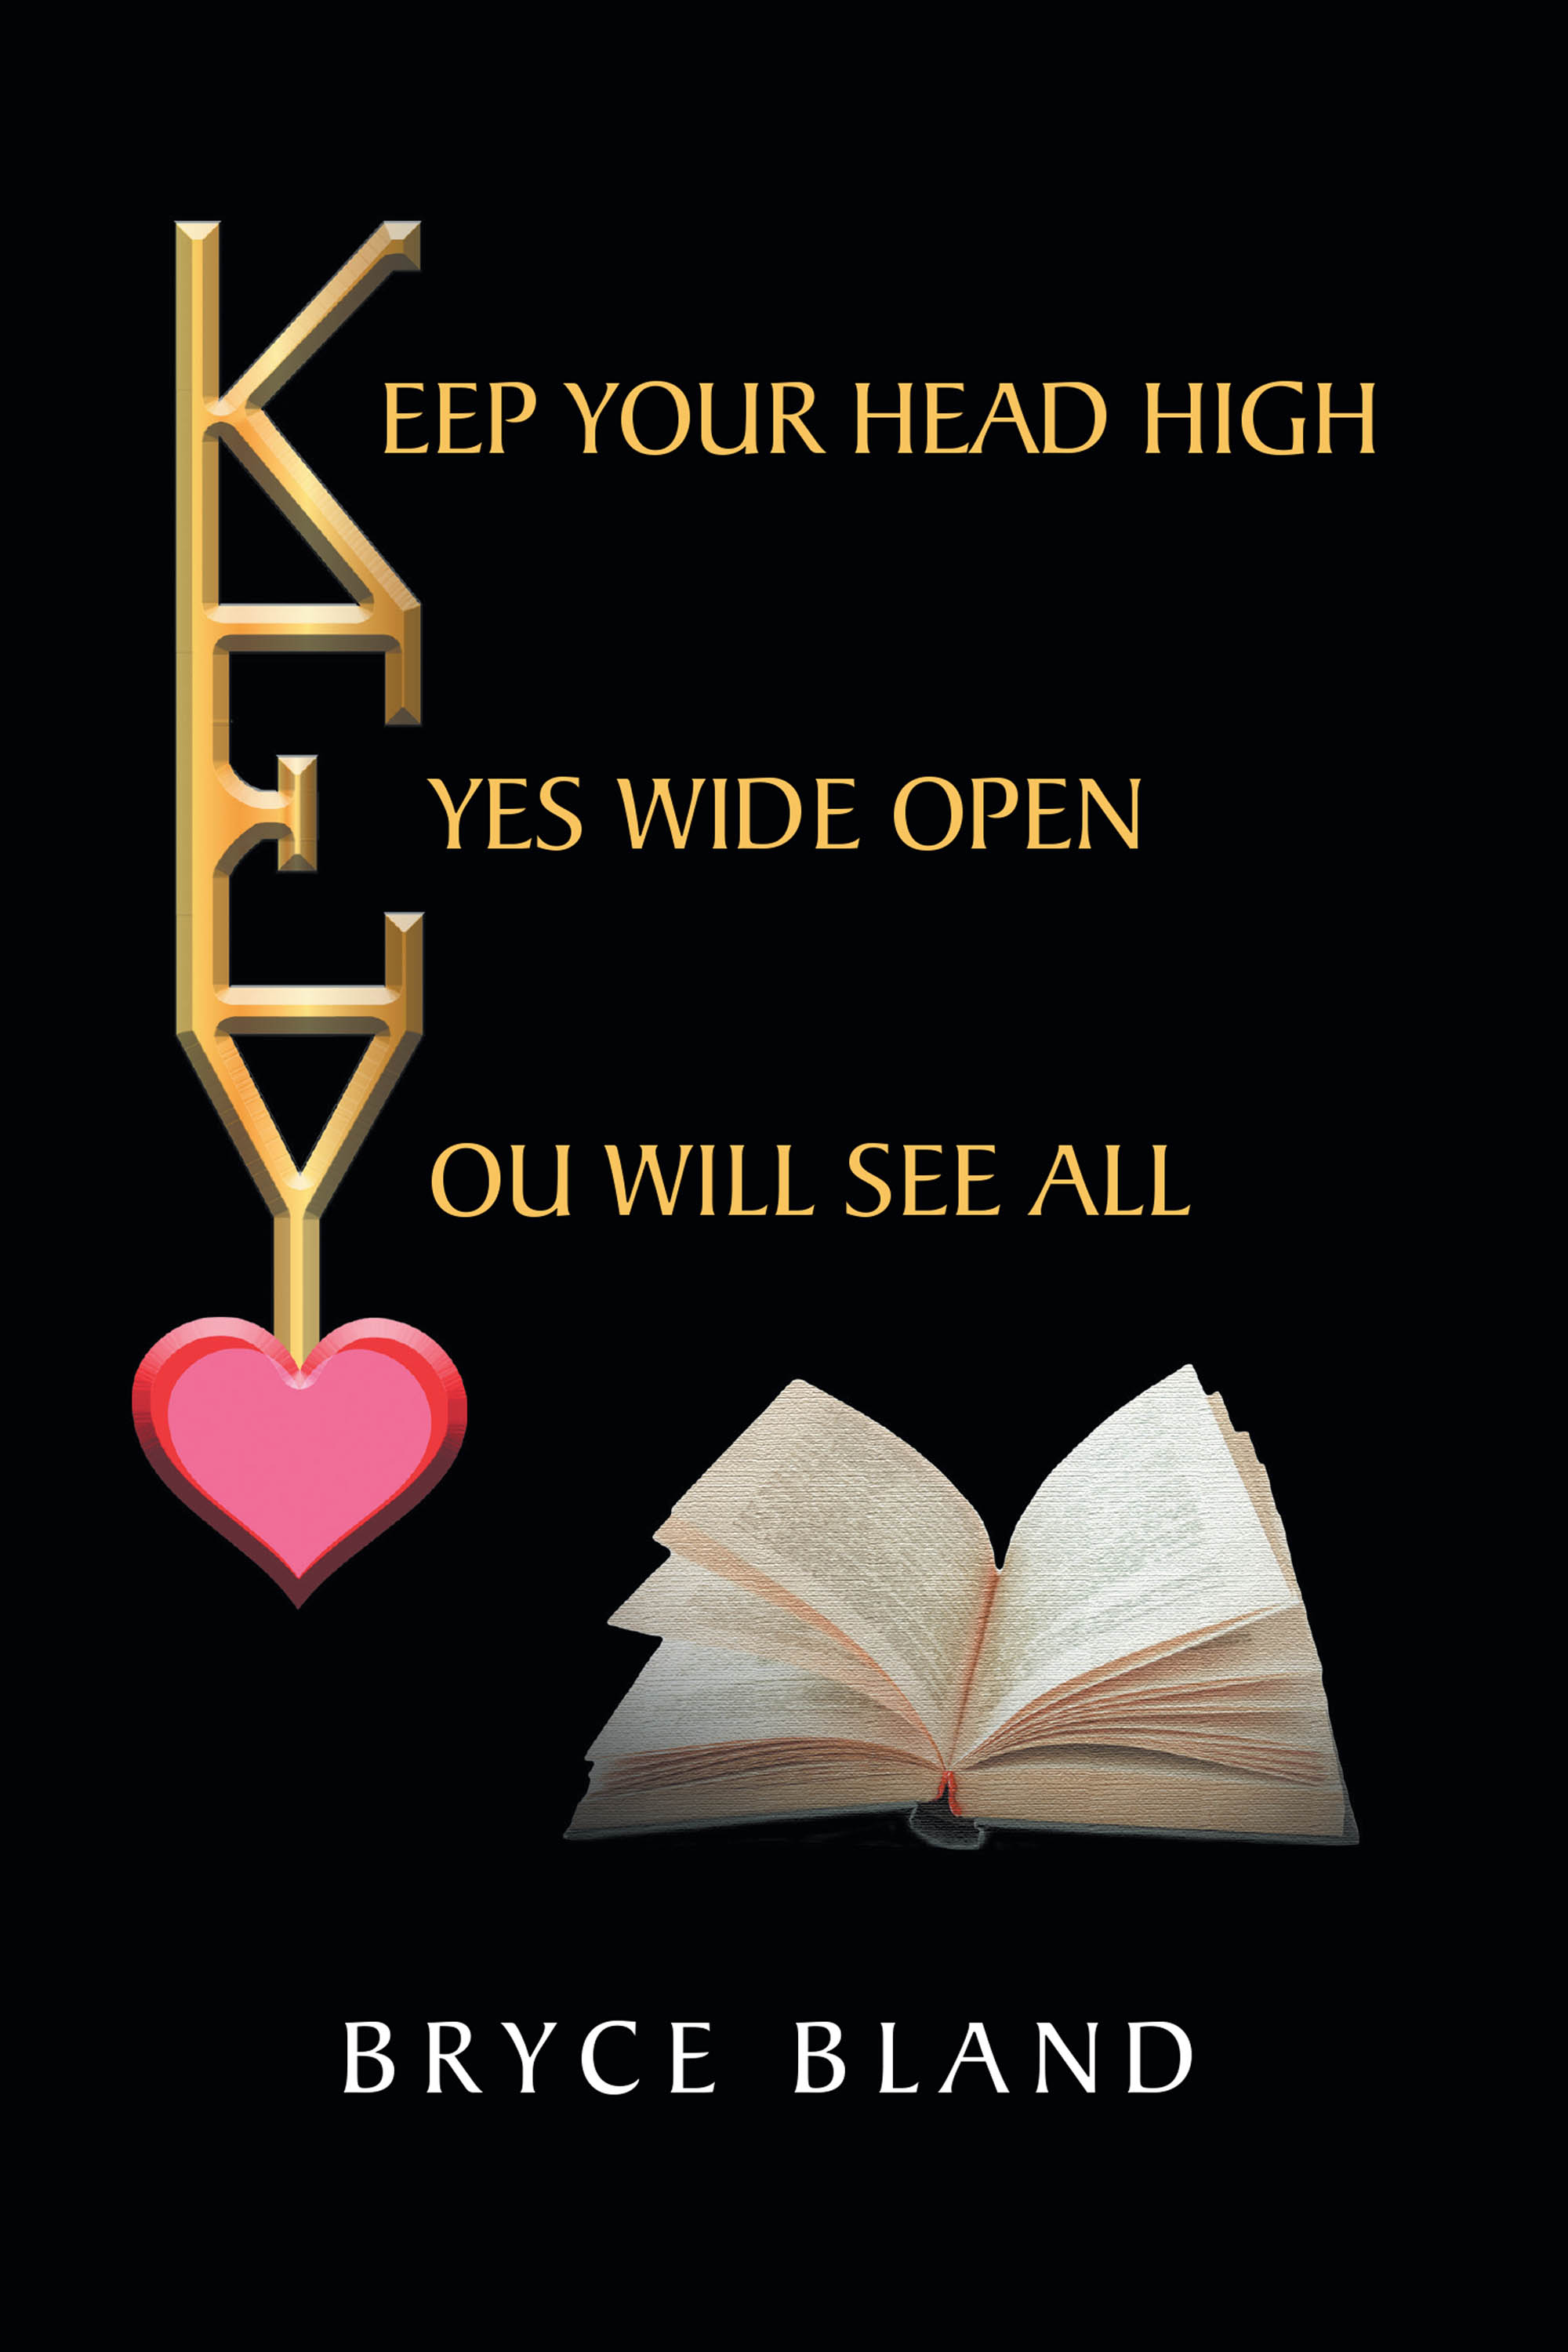 Author Bryce Bland’s New Book, "Keep Your Head High Eyes Wide Open You Will See All," is a Fantasy Romance Novel That Follows the Story of Allie and Jake